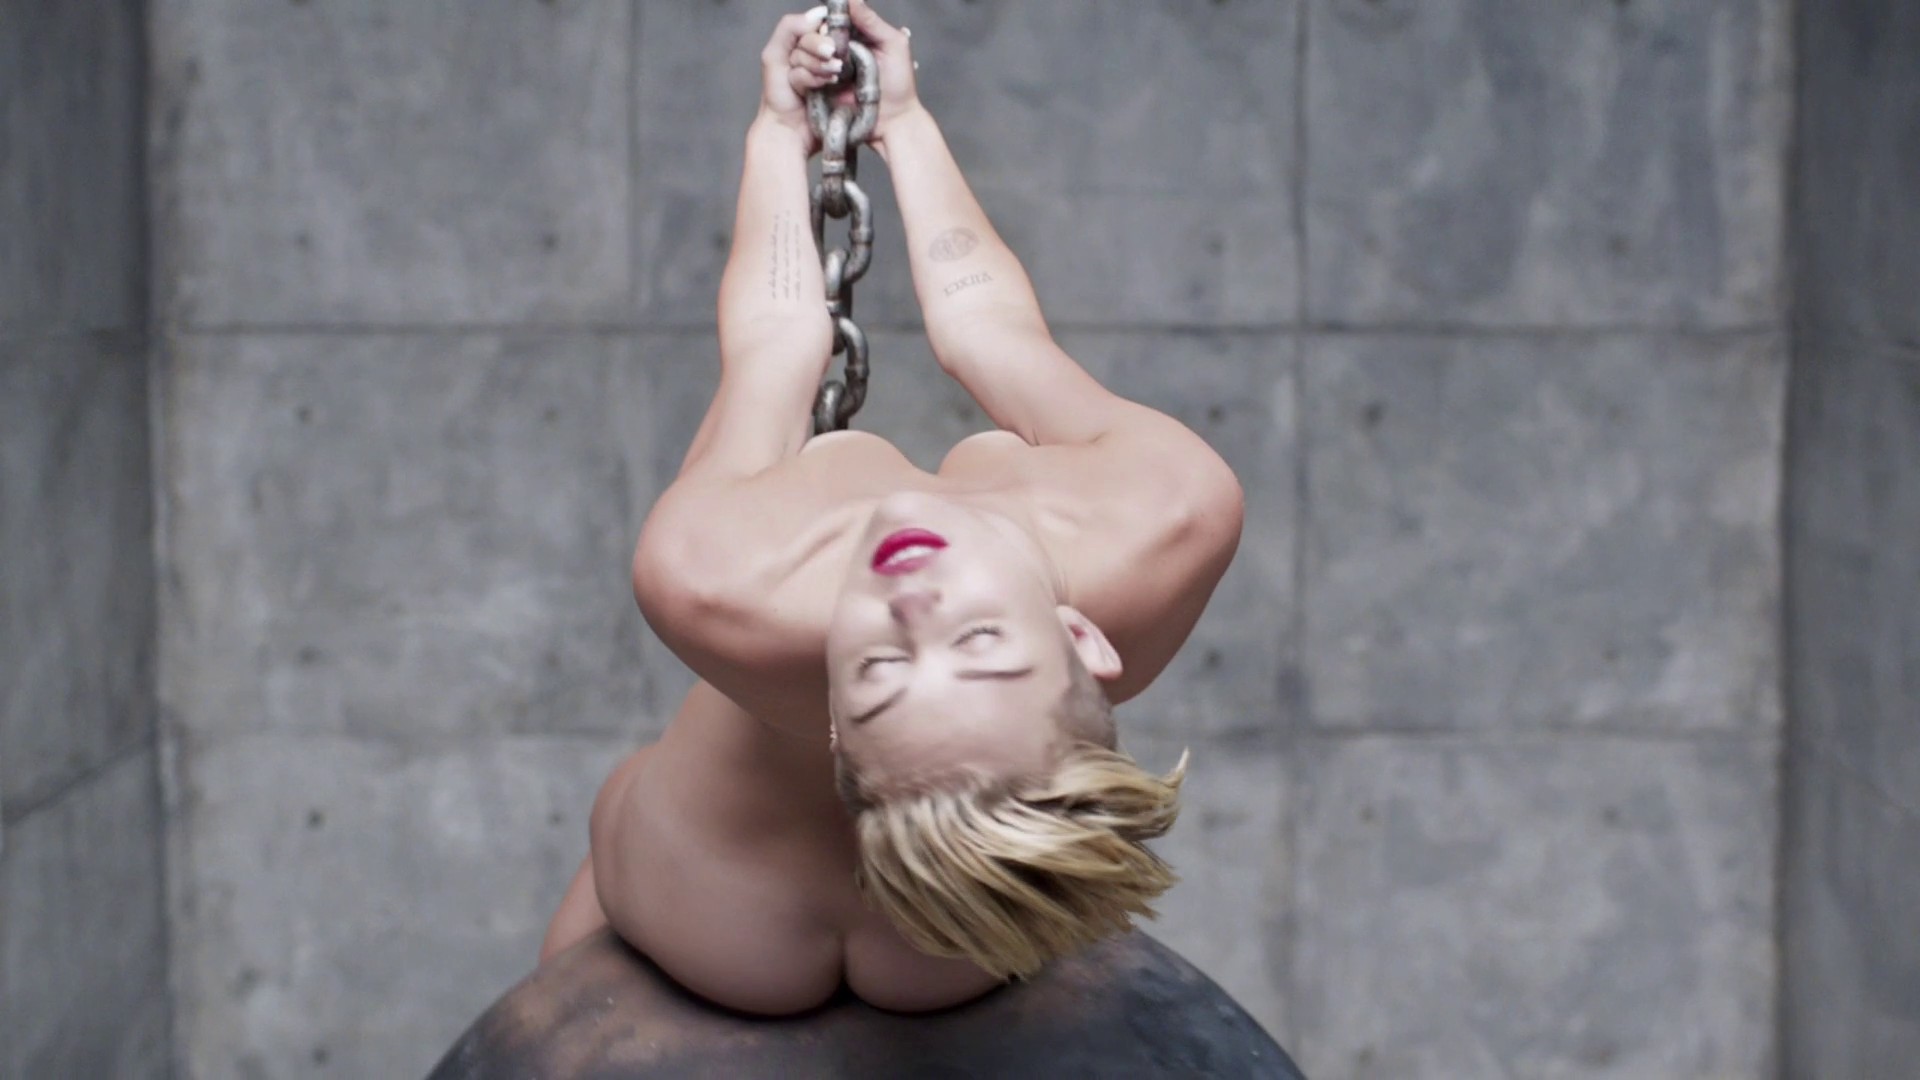 Miley Cyrus - Wrecking Ball explicit uncensored video 1080p1868.jpg